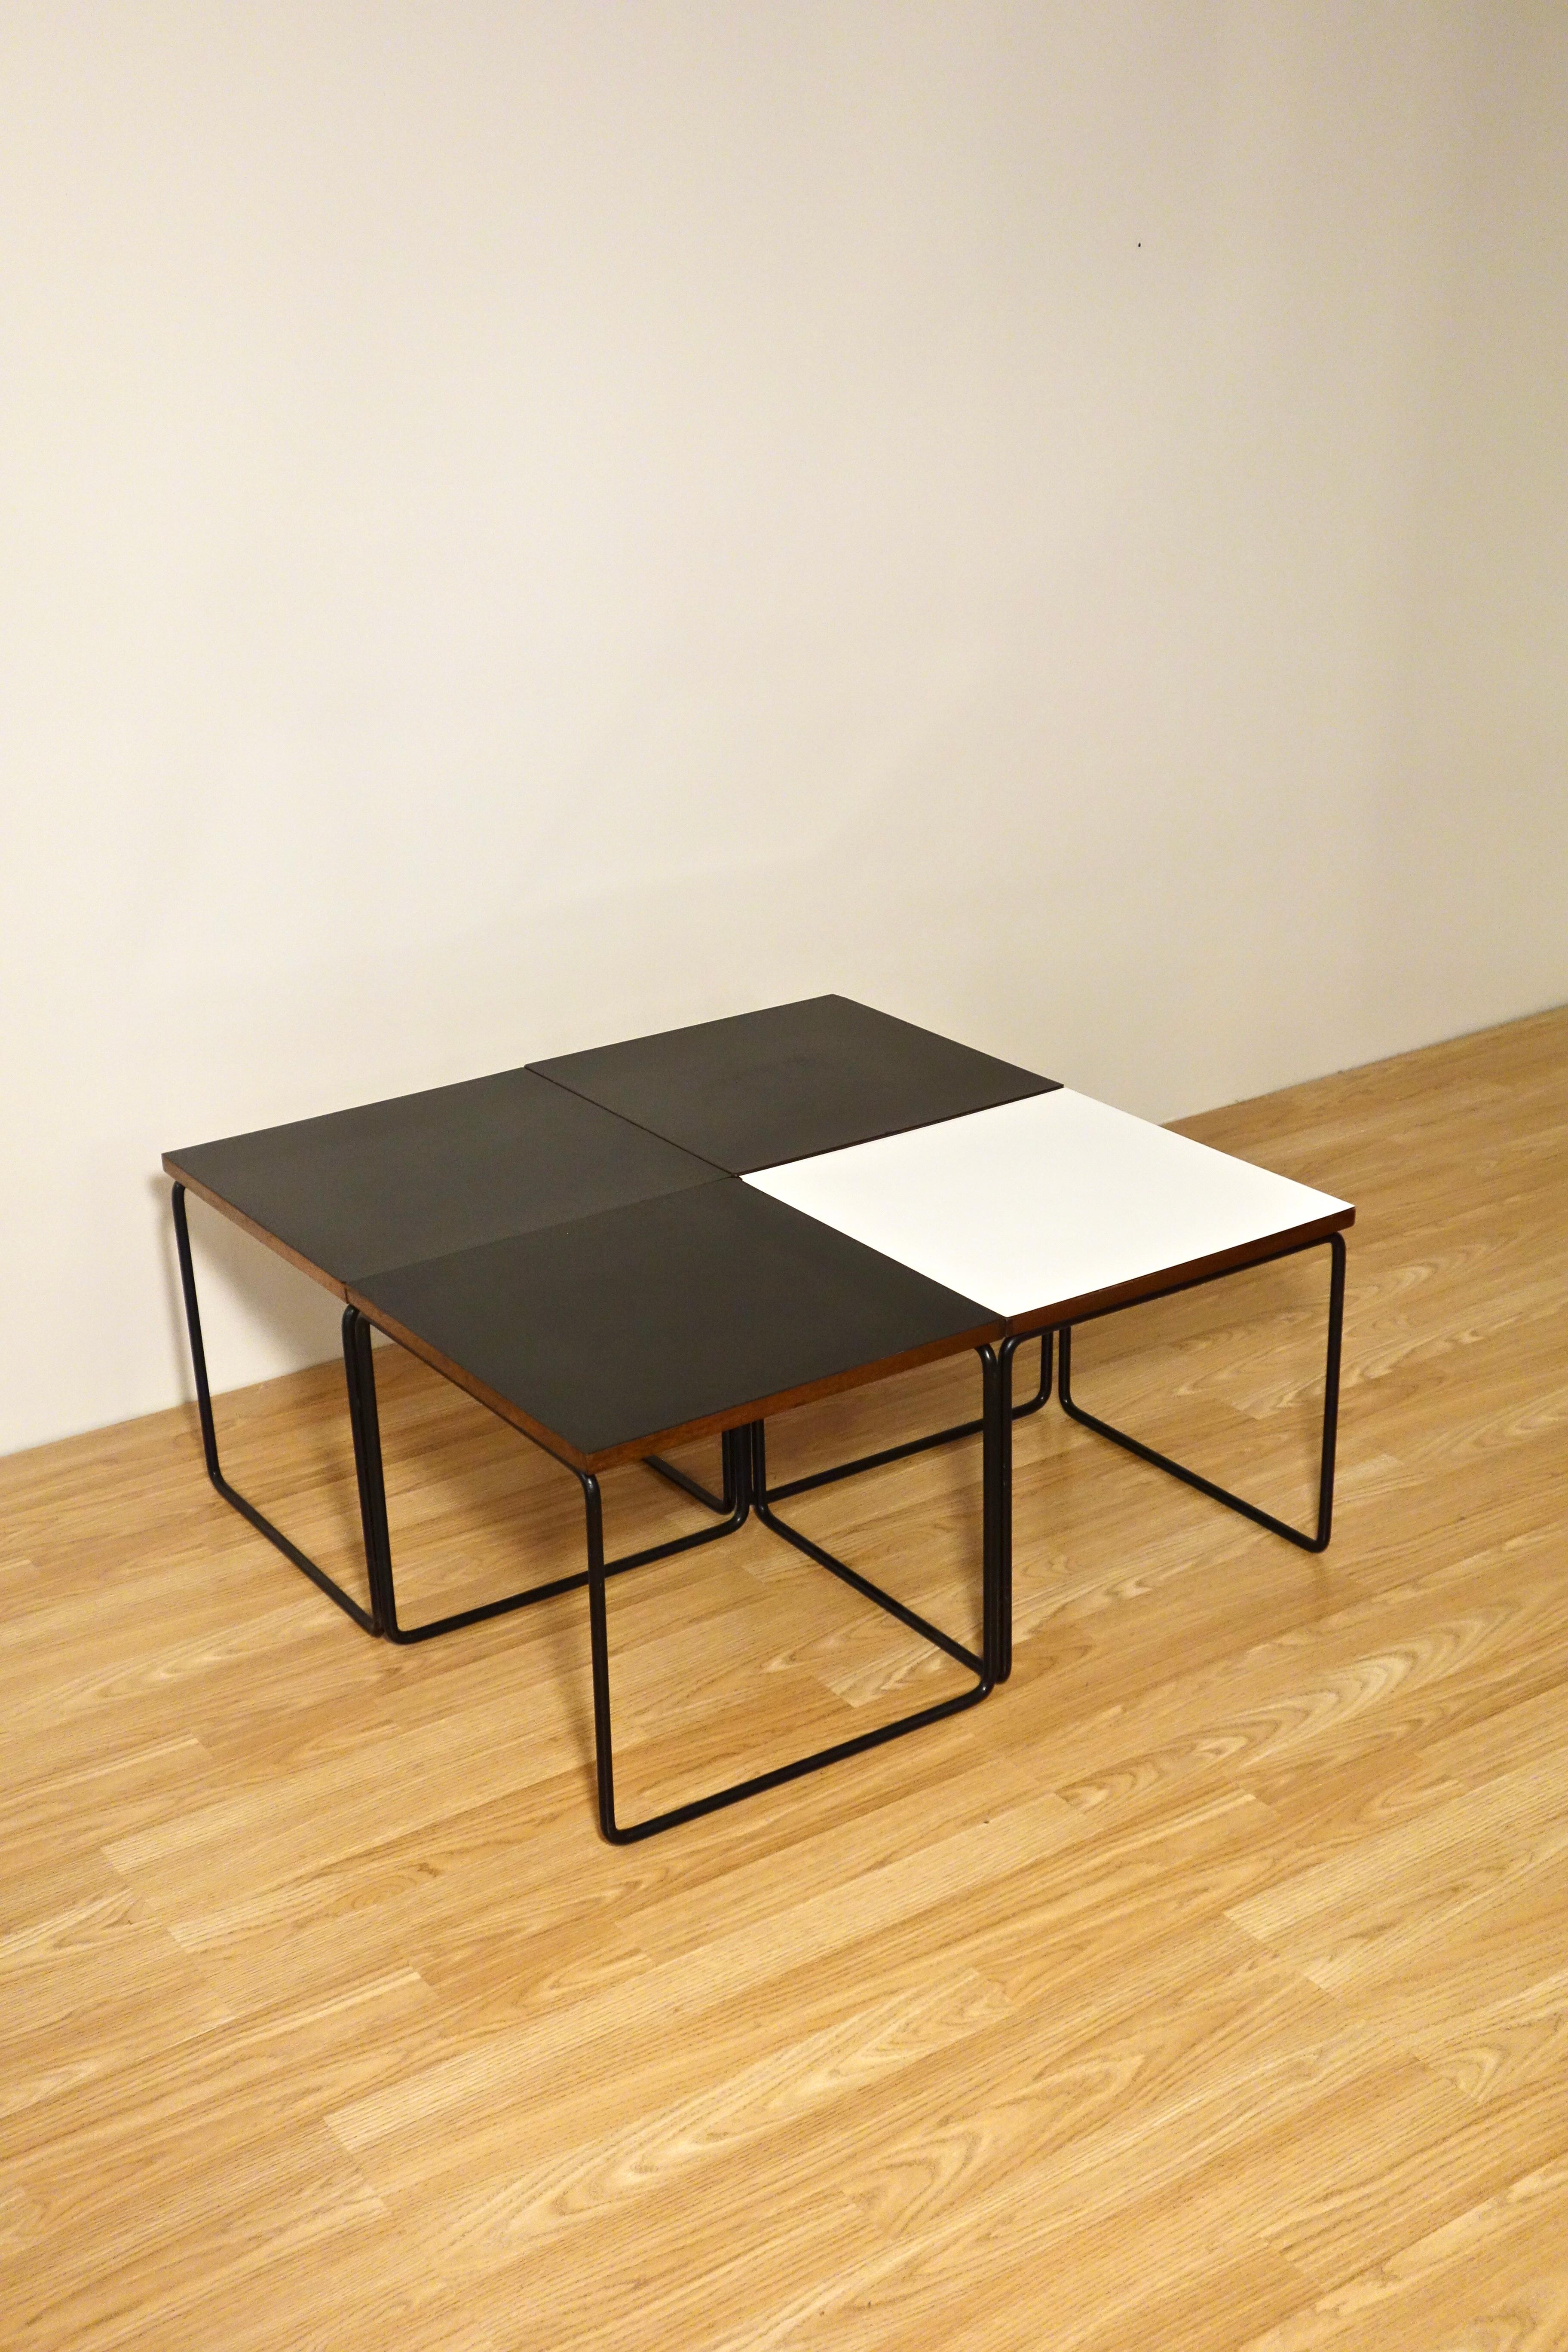 Lacquered Set of 4 Volante Coffee Tables by Pierre Guariche for Steiner, France 1950's